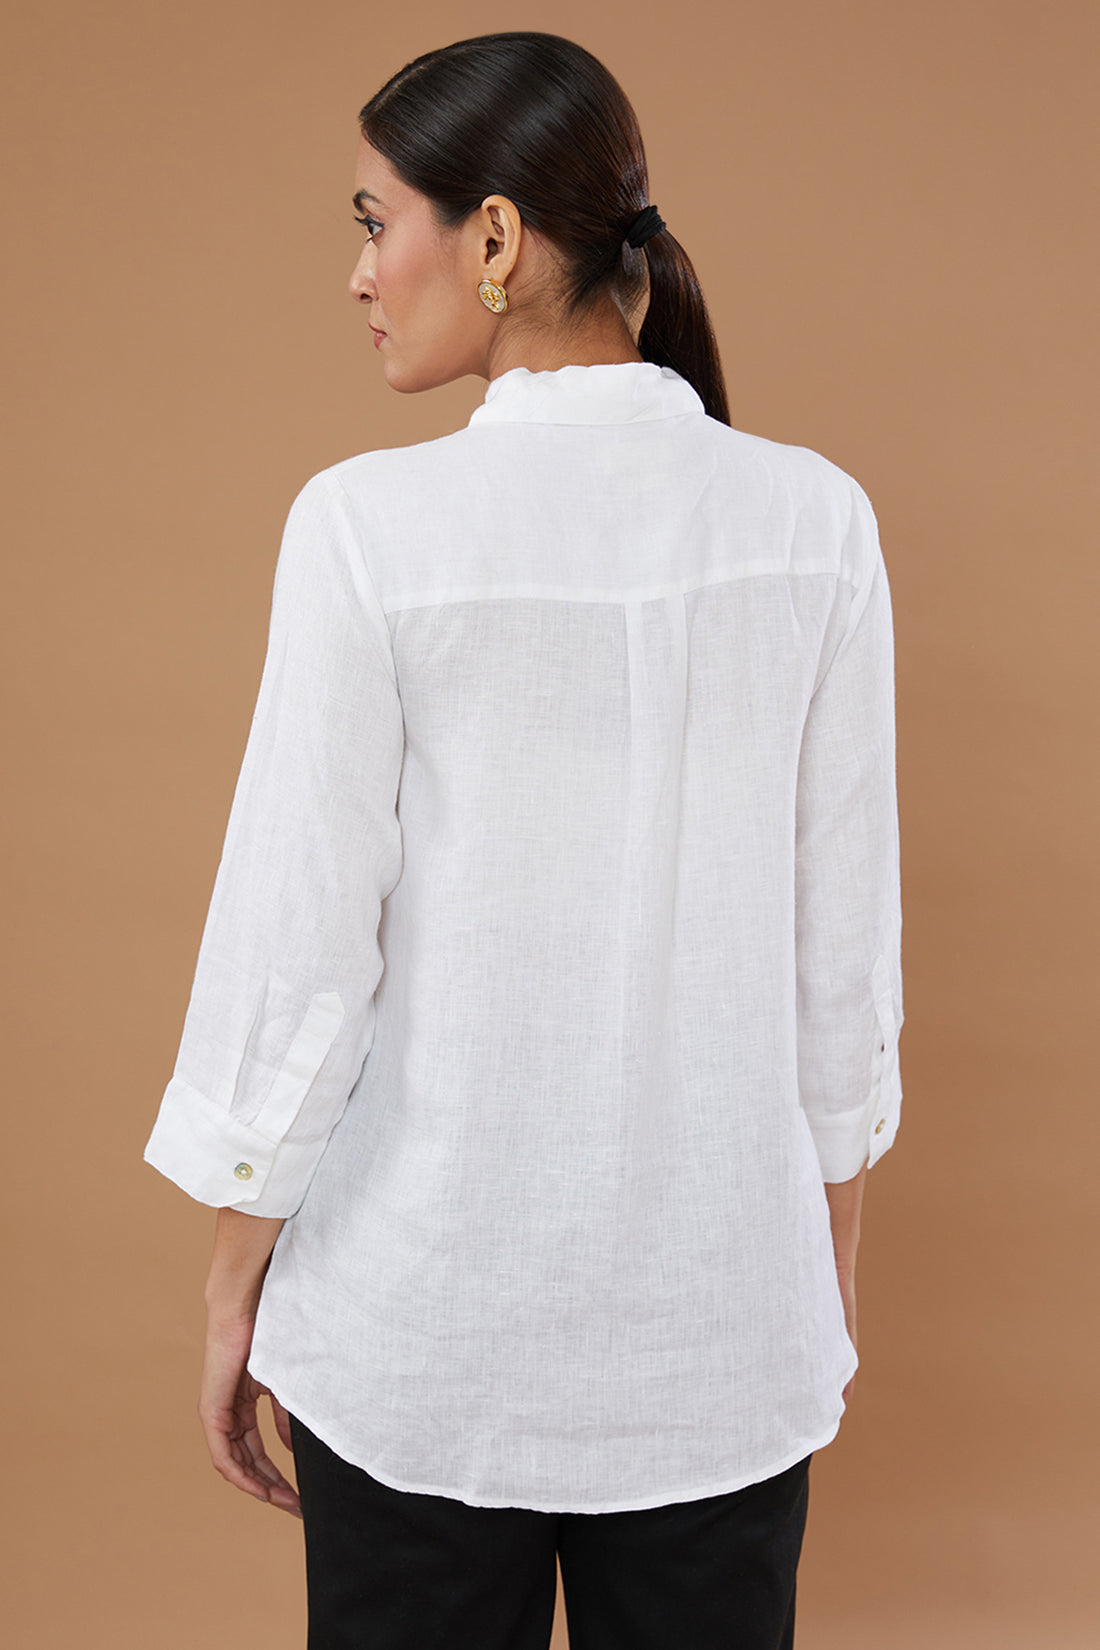 Featuring A White Shirt In Pure Linen Base With Flamingo Hand Embroidery.  Accessorise With Dangler Earrings And Heels. Composition: Pure Linen. Fit:  Fitted At Bust. Components: 1 Note: The Pants In The